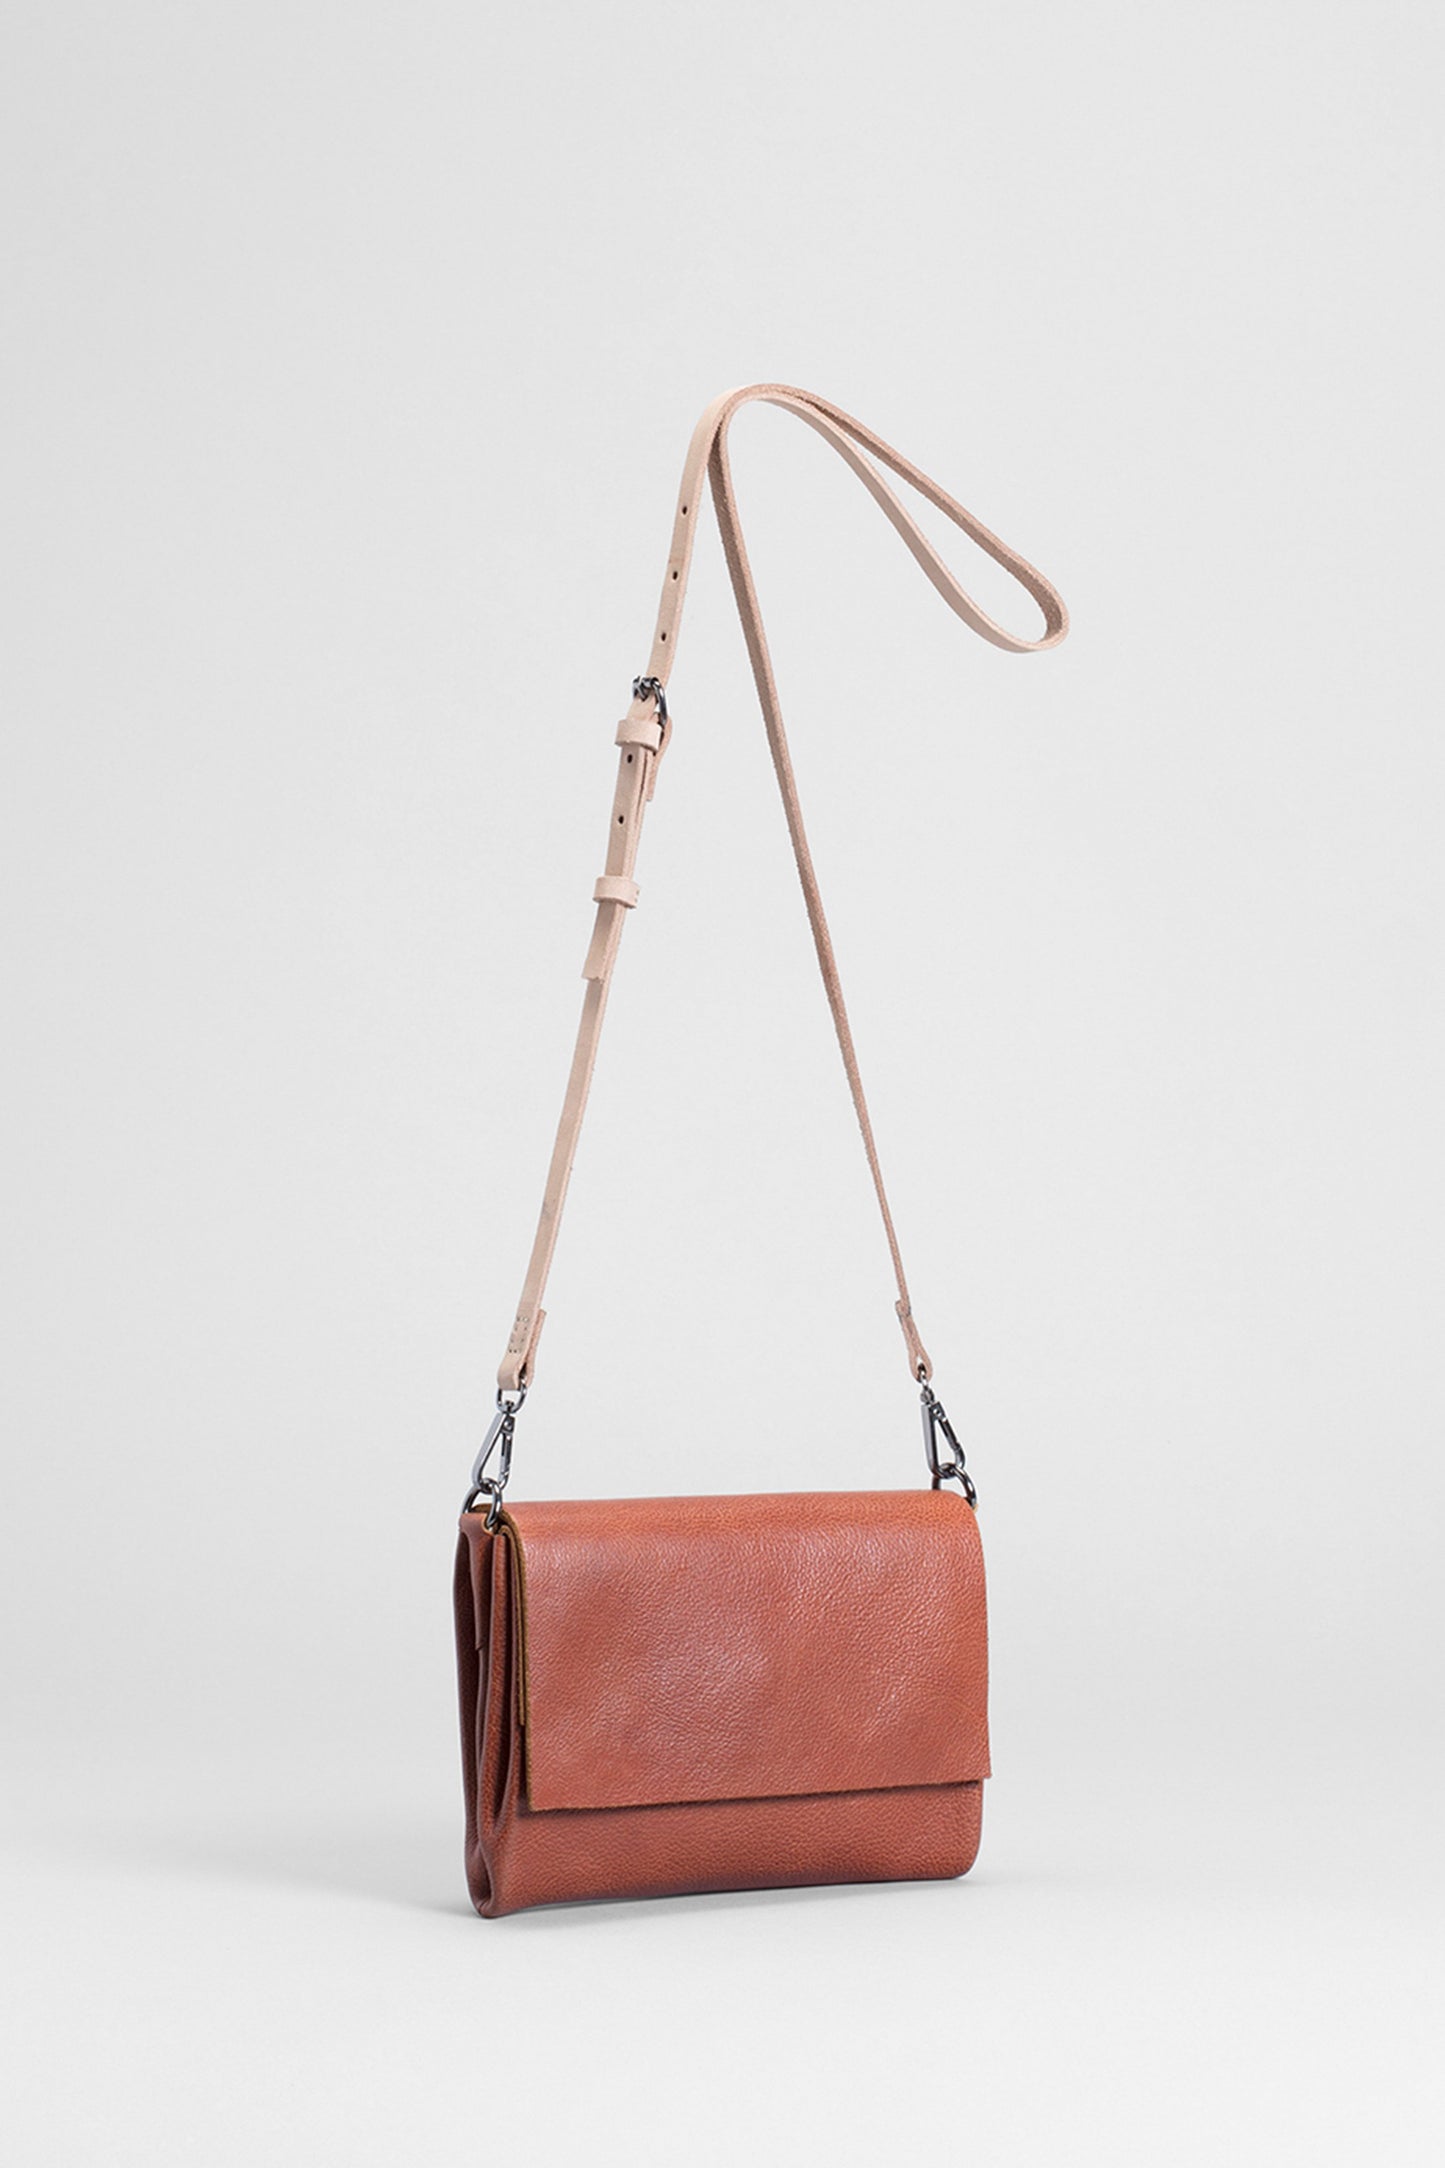 Madel Crossbody Leather Bag Front Angled TAN / NATURAL